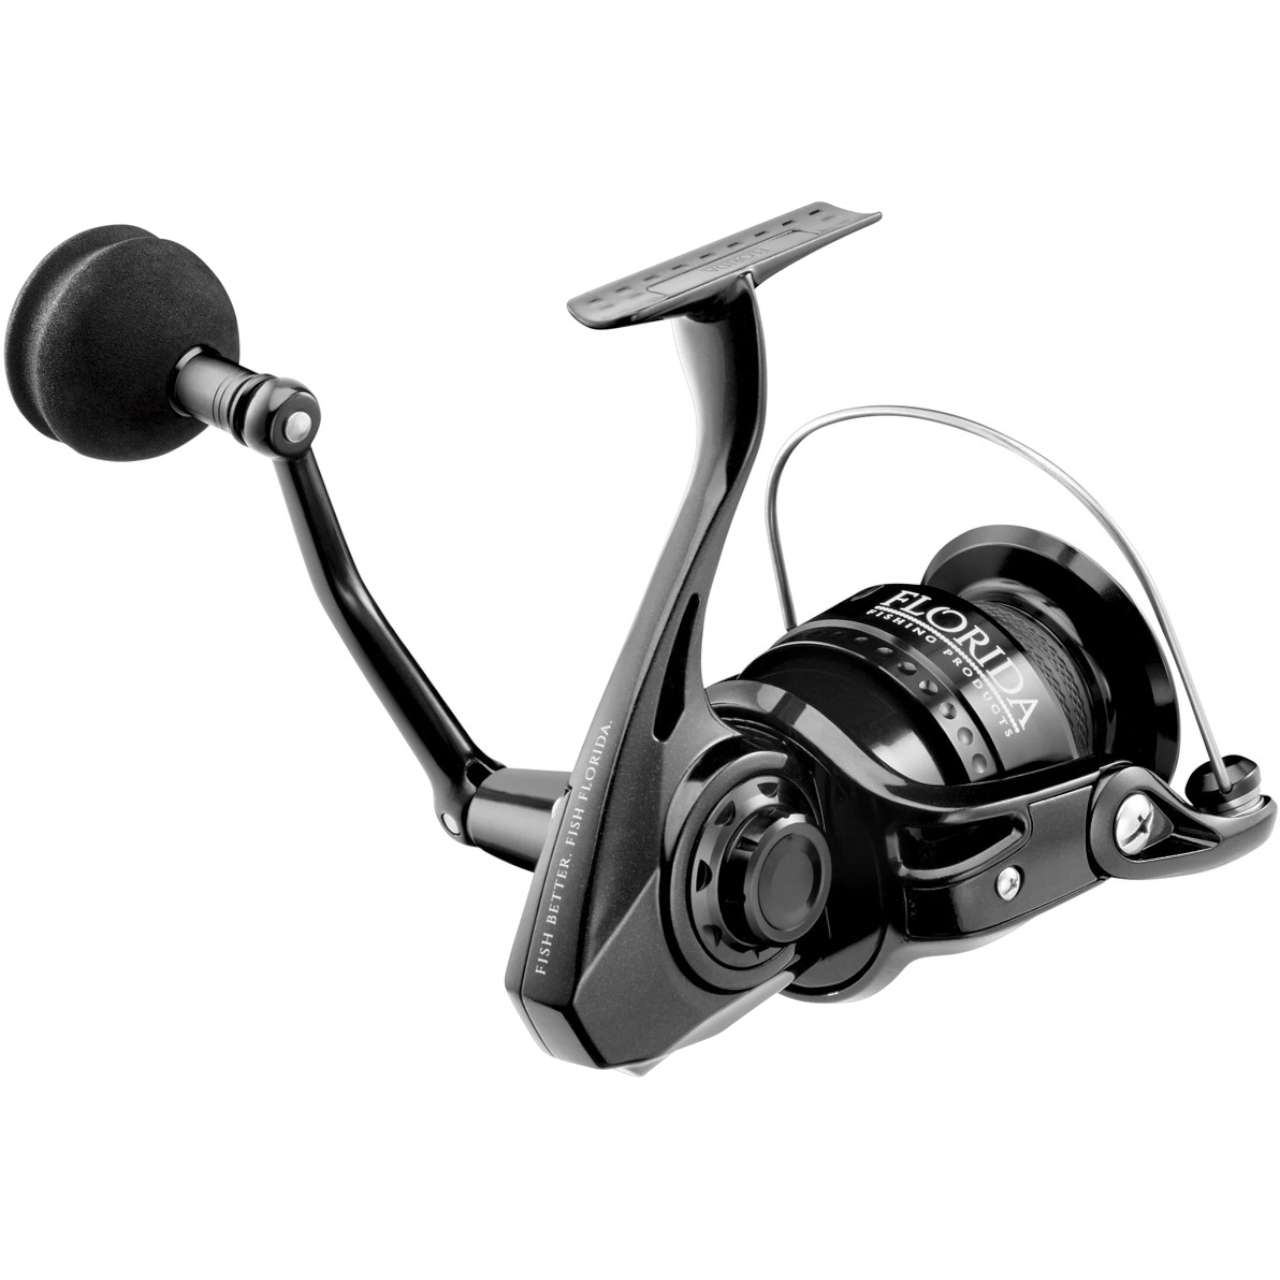 https://i.tackledirect.com/images/inset1/florida-fishing-products-osprey-saltwater-series-6000-spinning-reel.jpg